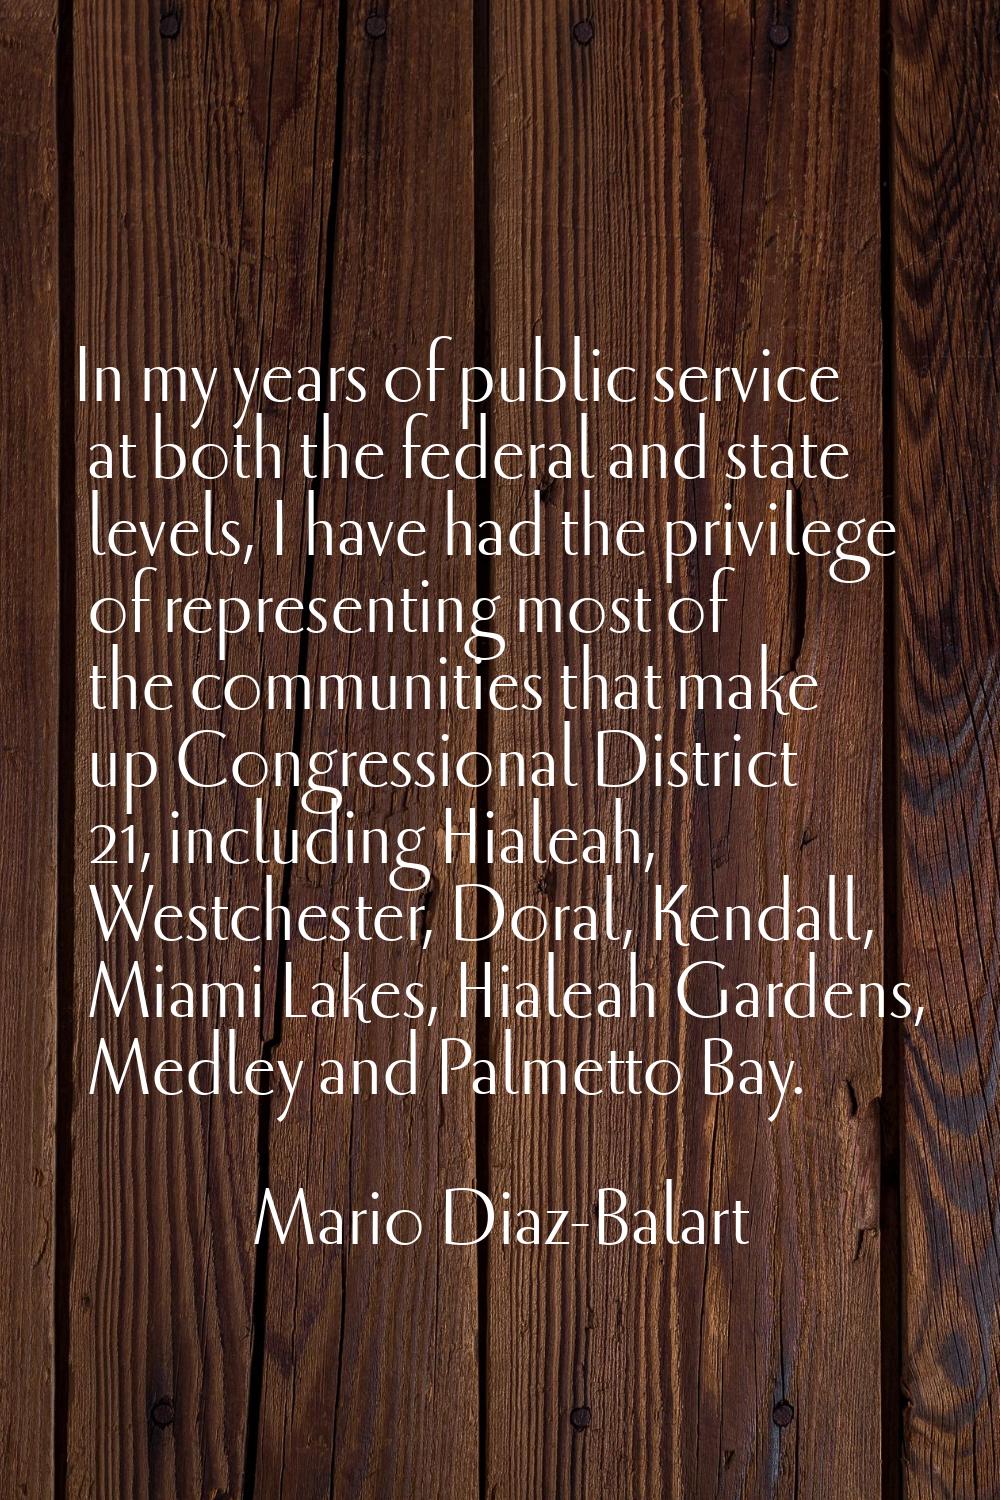 In my years of public service at both the federal and state levels, I have had the privilege of rep